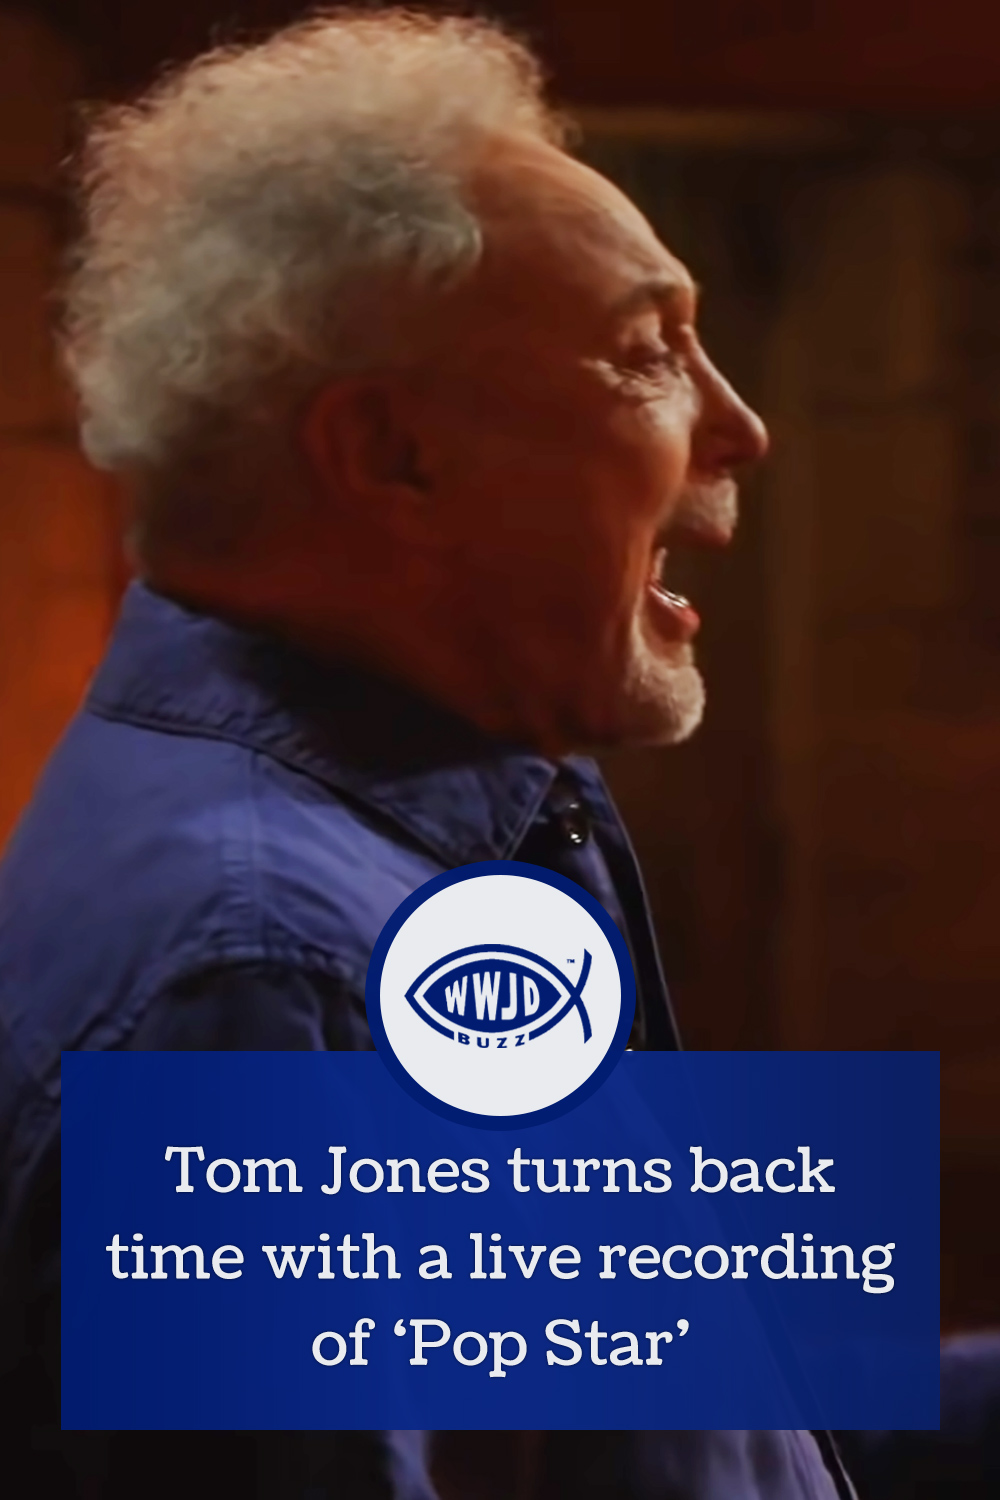 Tom Jones turns back time with a live recording of ‘Pop Star’